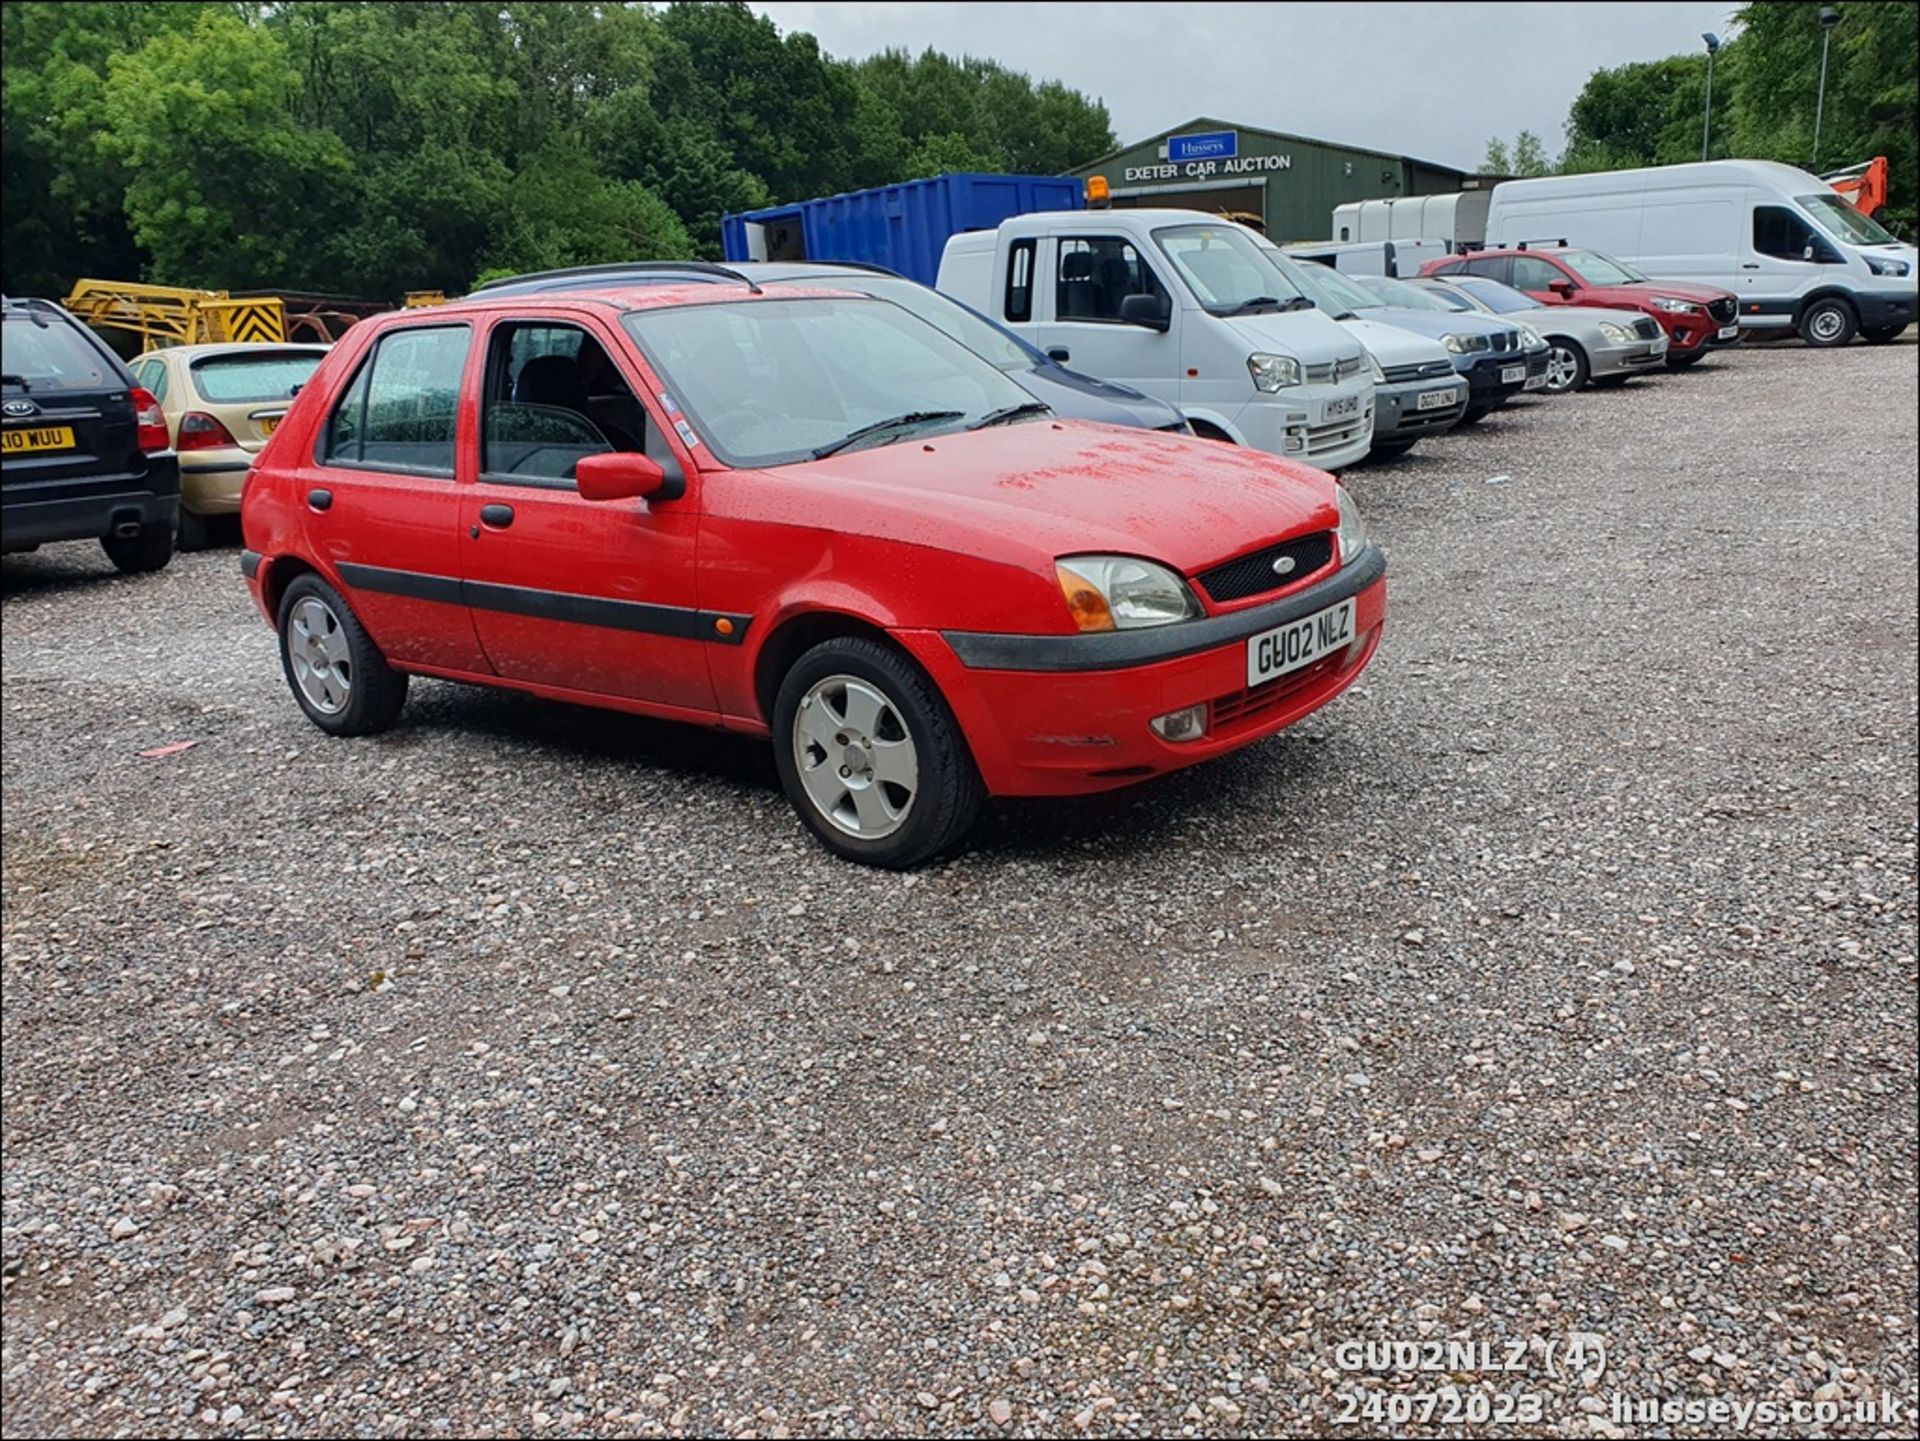 02/02 FORD FIESTA FREESTYLE - 1242cc 3dr Hatchback (Red) - Image 4 of 42